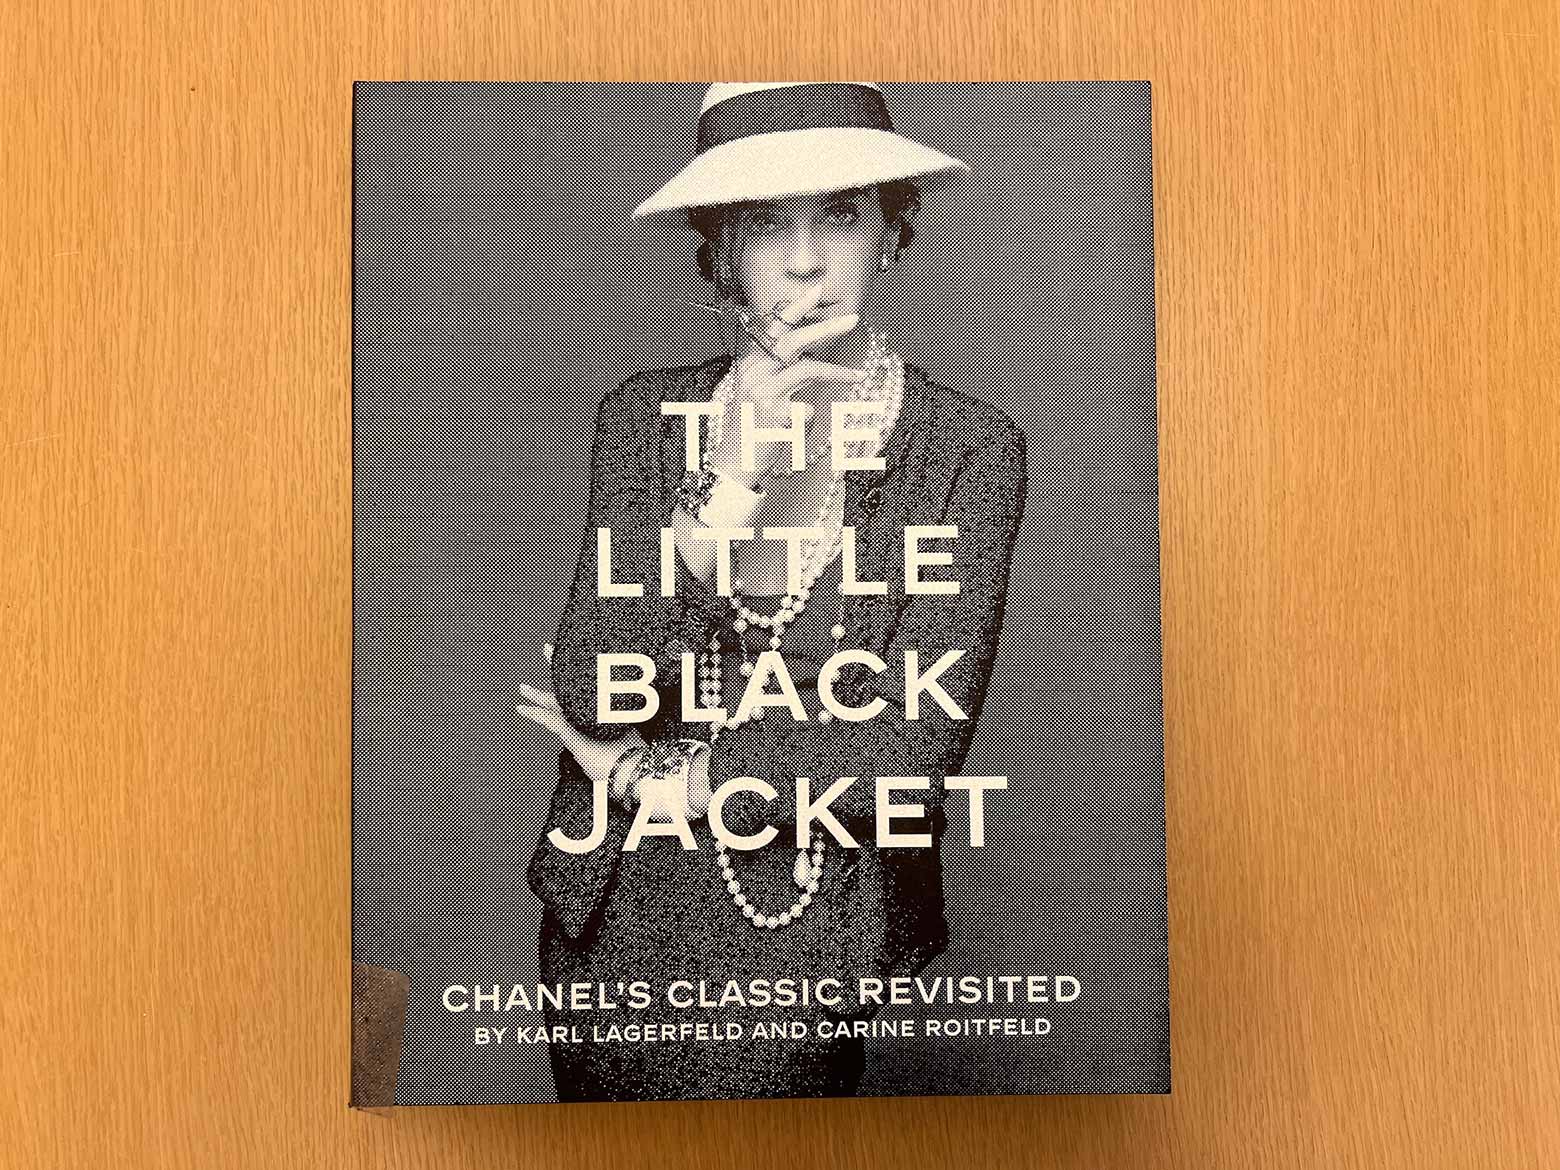 Cover of the little black jacket